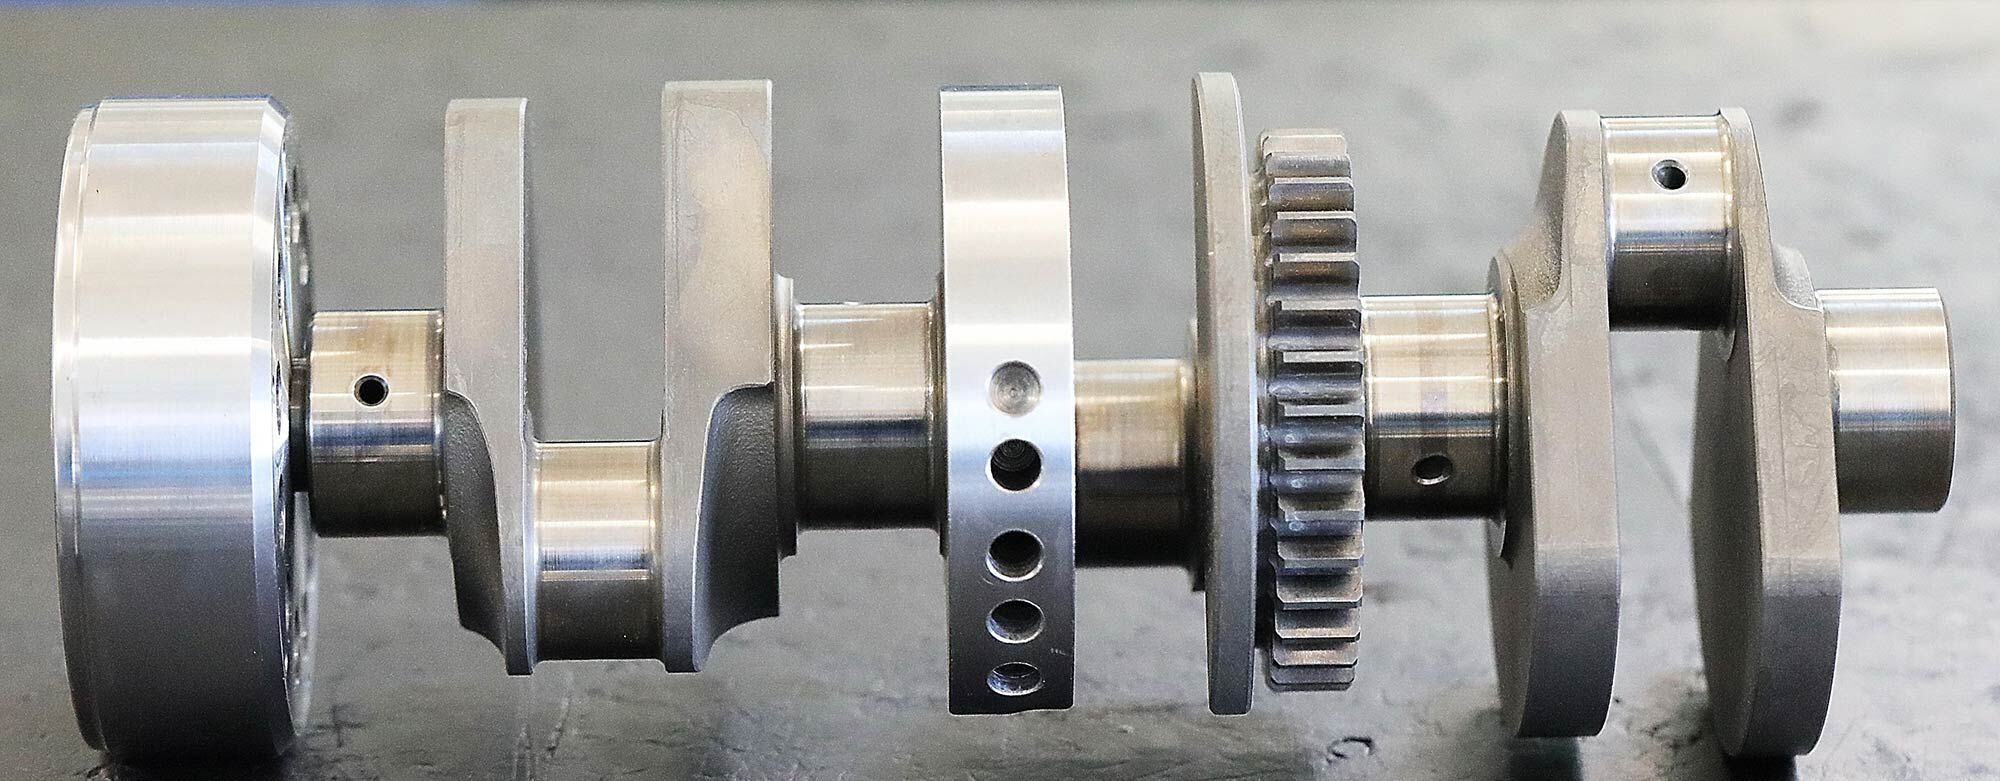 The new crankshaft not only provides a longer 60.2mm stroke, but is also stronger, with four 37mm main journals and three 35mm rod journals. The integral gear drives the balancing shaft at 1:1 to cancel the vibrations generated by the primary-order rocking momentum typical of an inline-three.